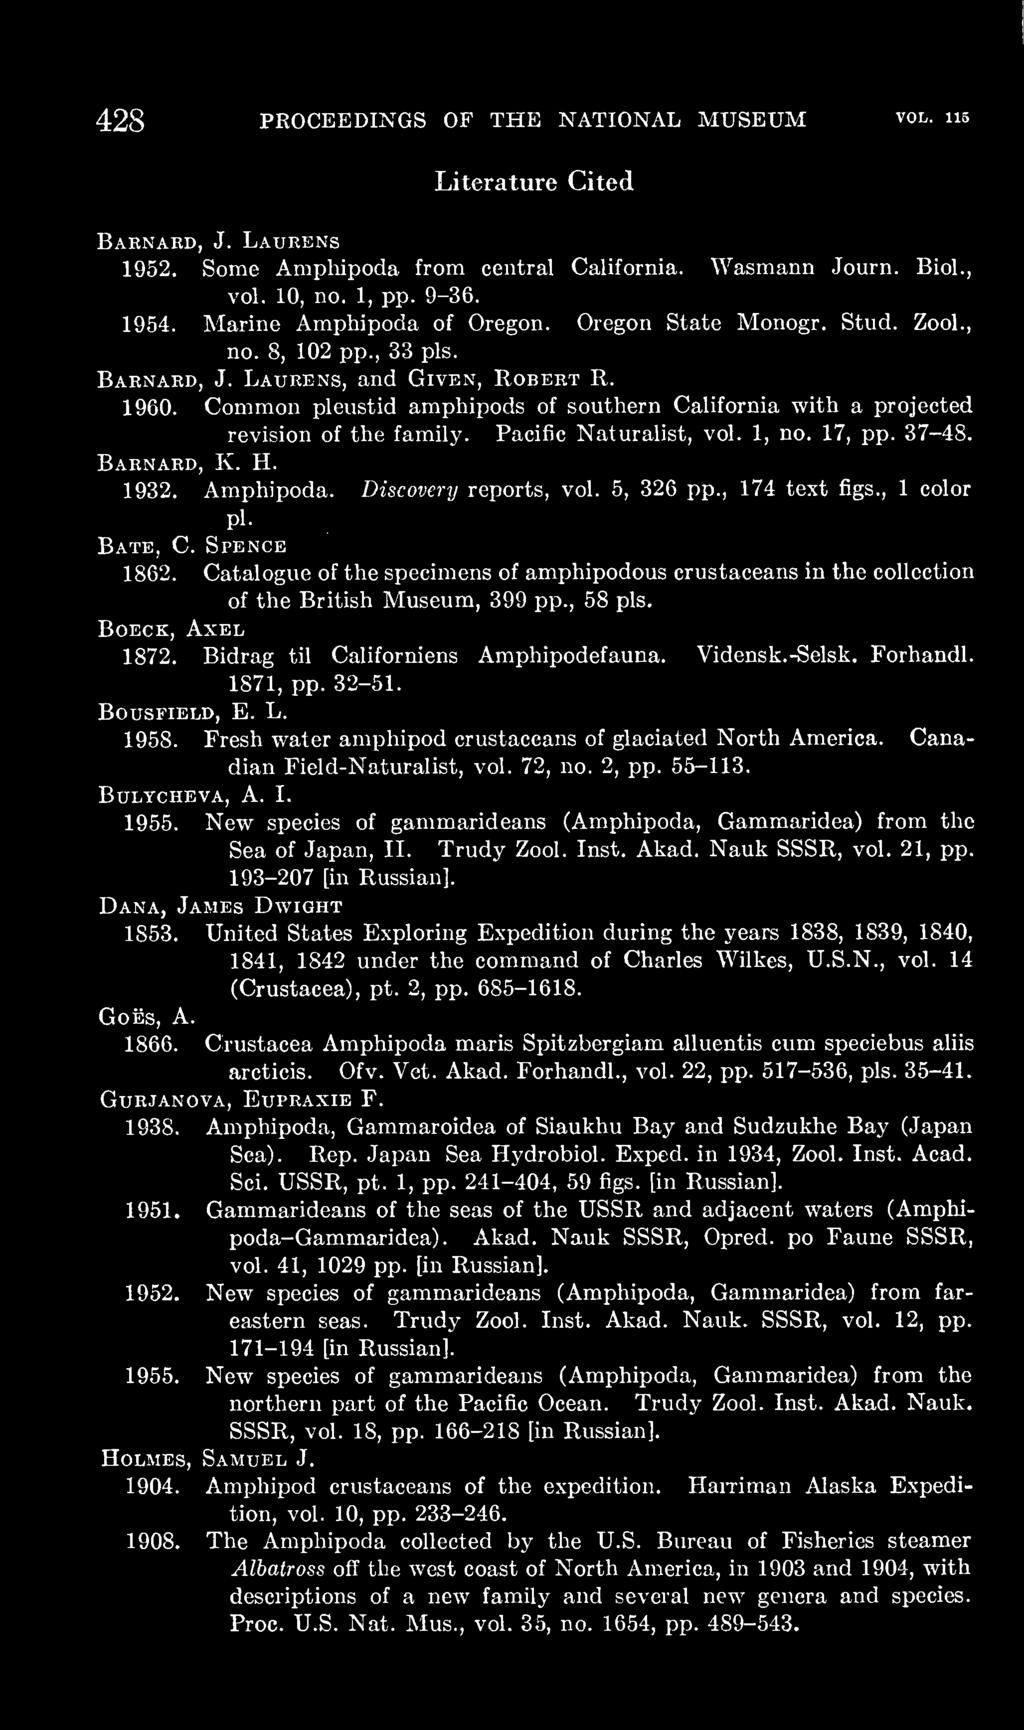 Common pleustid amphipods of southern California with a projected revision of the family. Pacific Naturalist, vol. 1, no. 17, pp. 37-48. Barnard, K. H. 1932. Amphipoda. Discovery reports, vol.